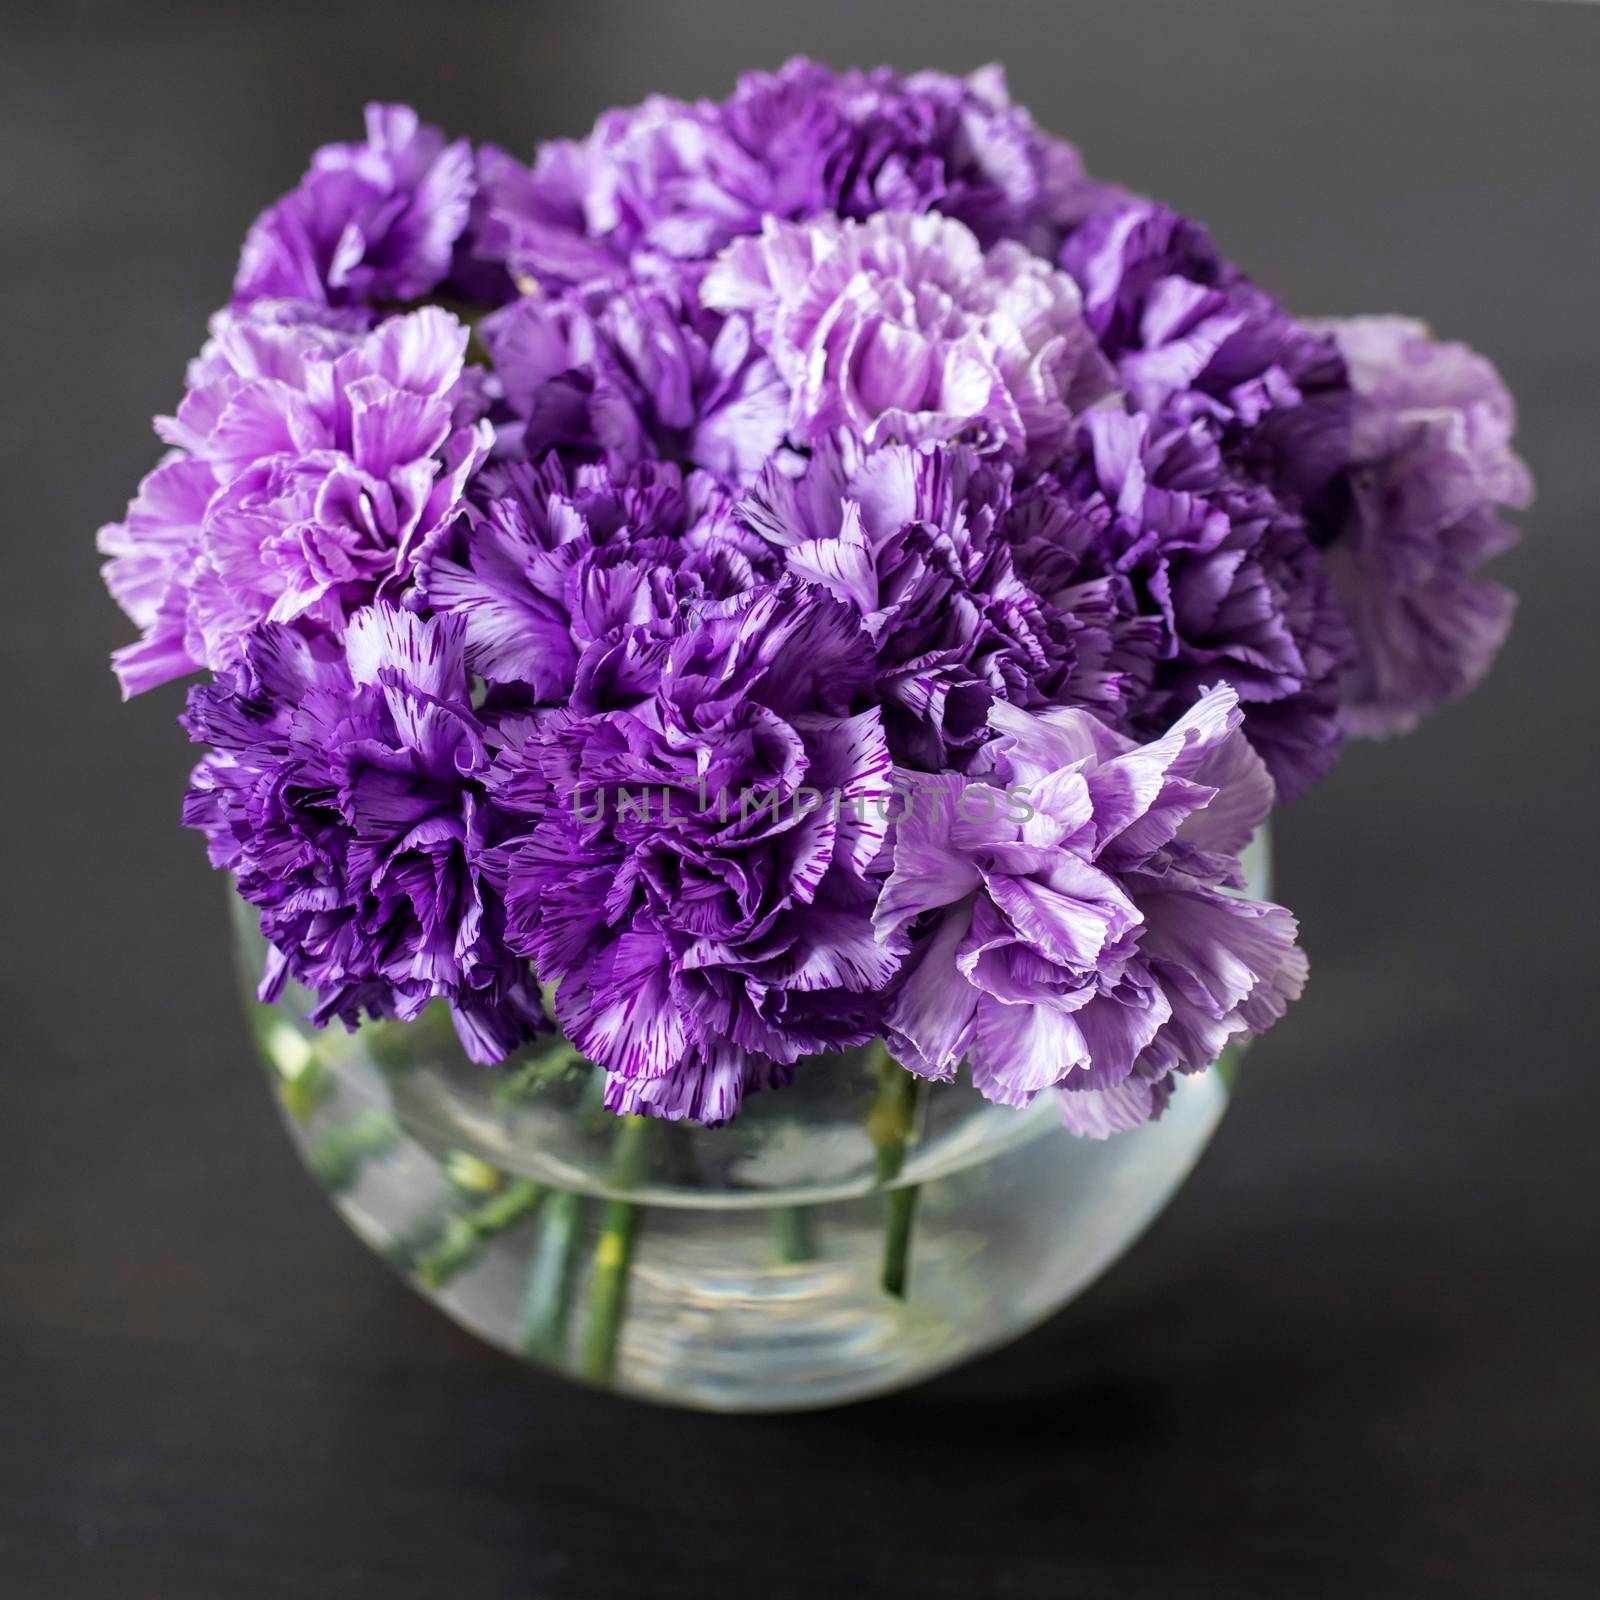 Bridal bouquet of lilac carnations in a round glass vase Bridal bouquet of lilac carnations in a round glass vase as table decoration by elenarostunova